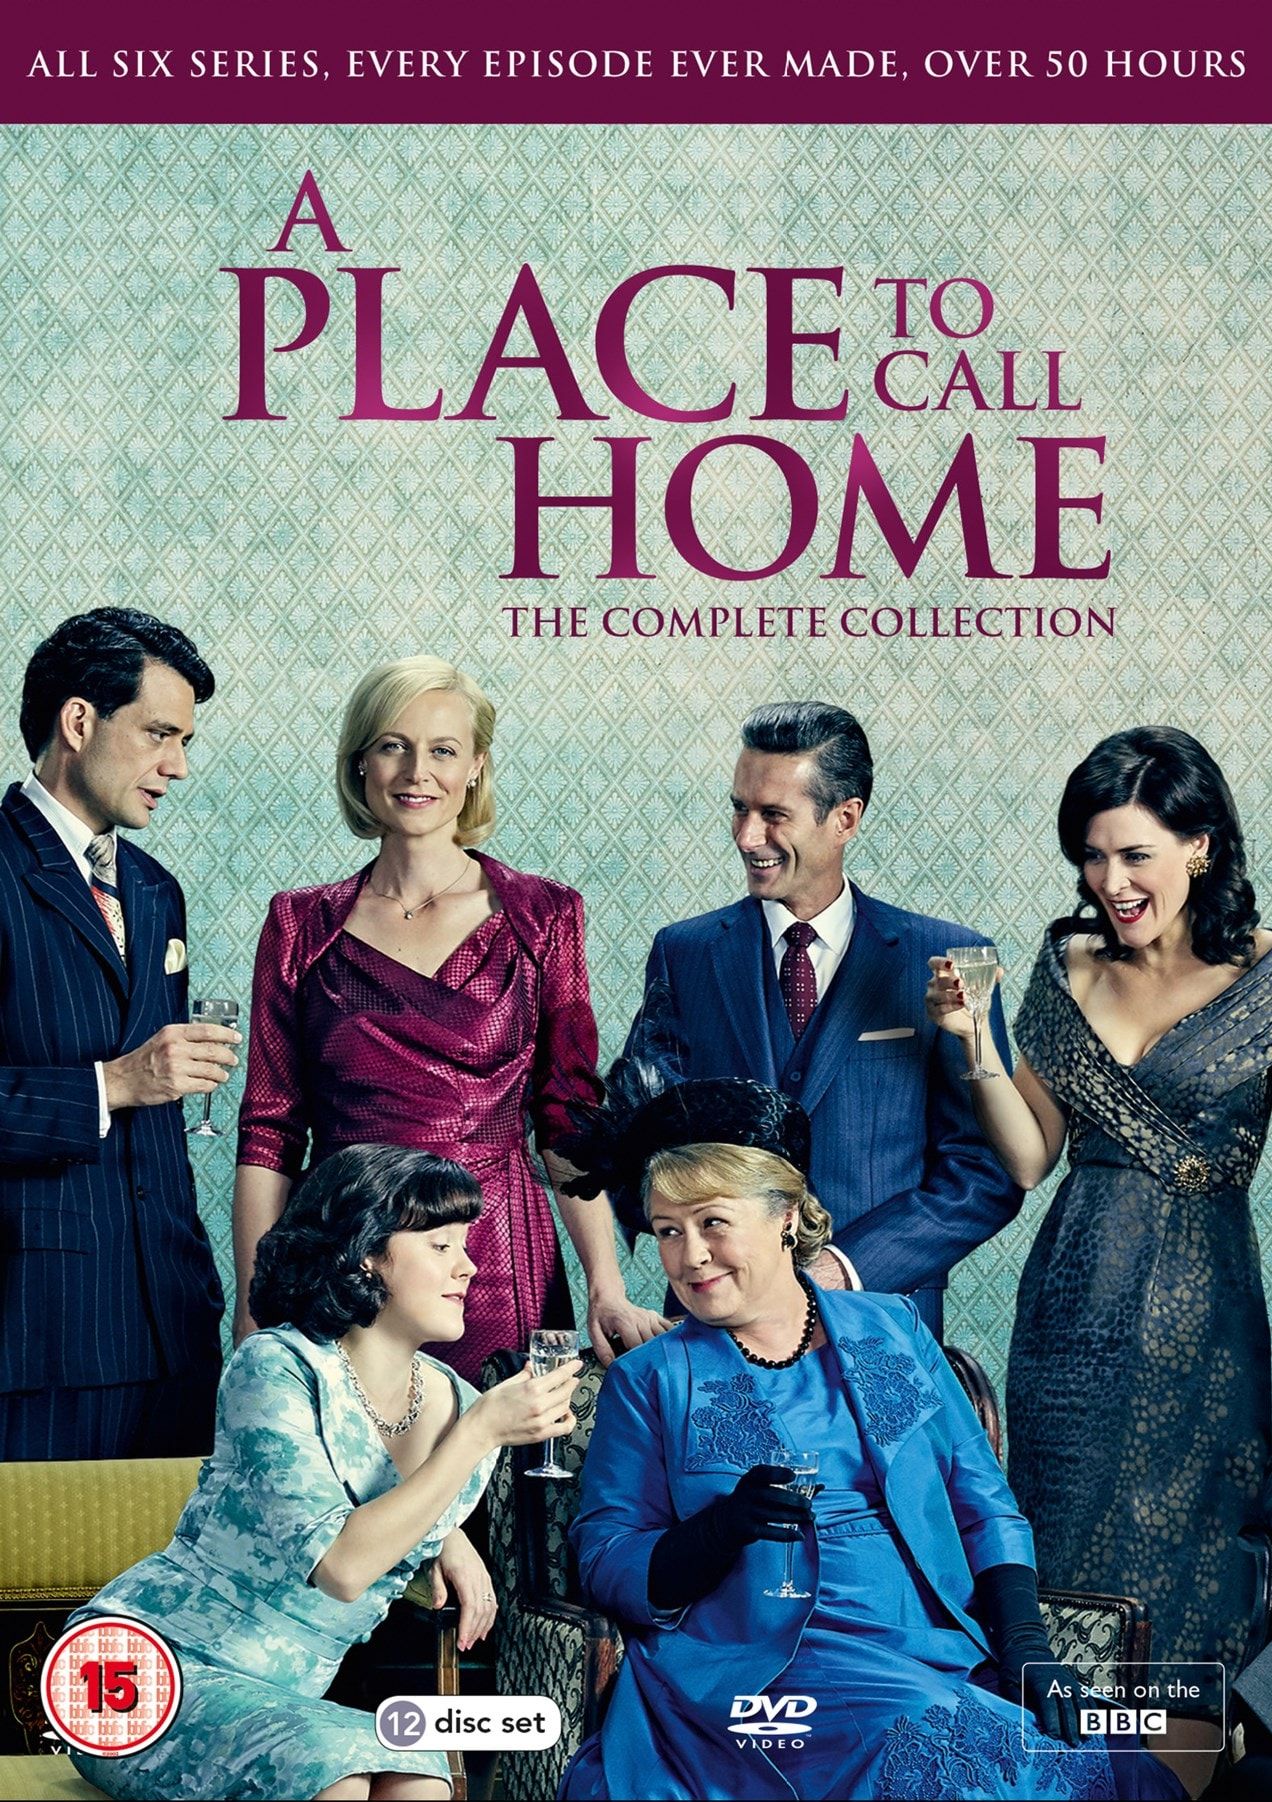 A Place to Call Home DVD Cover